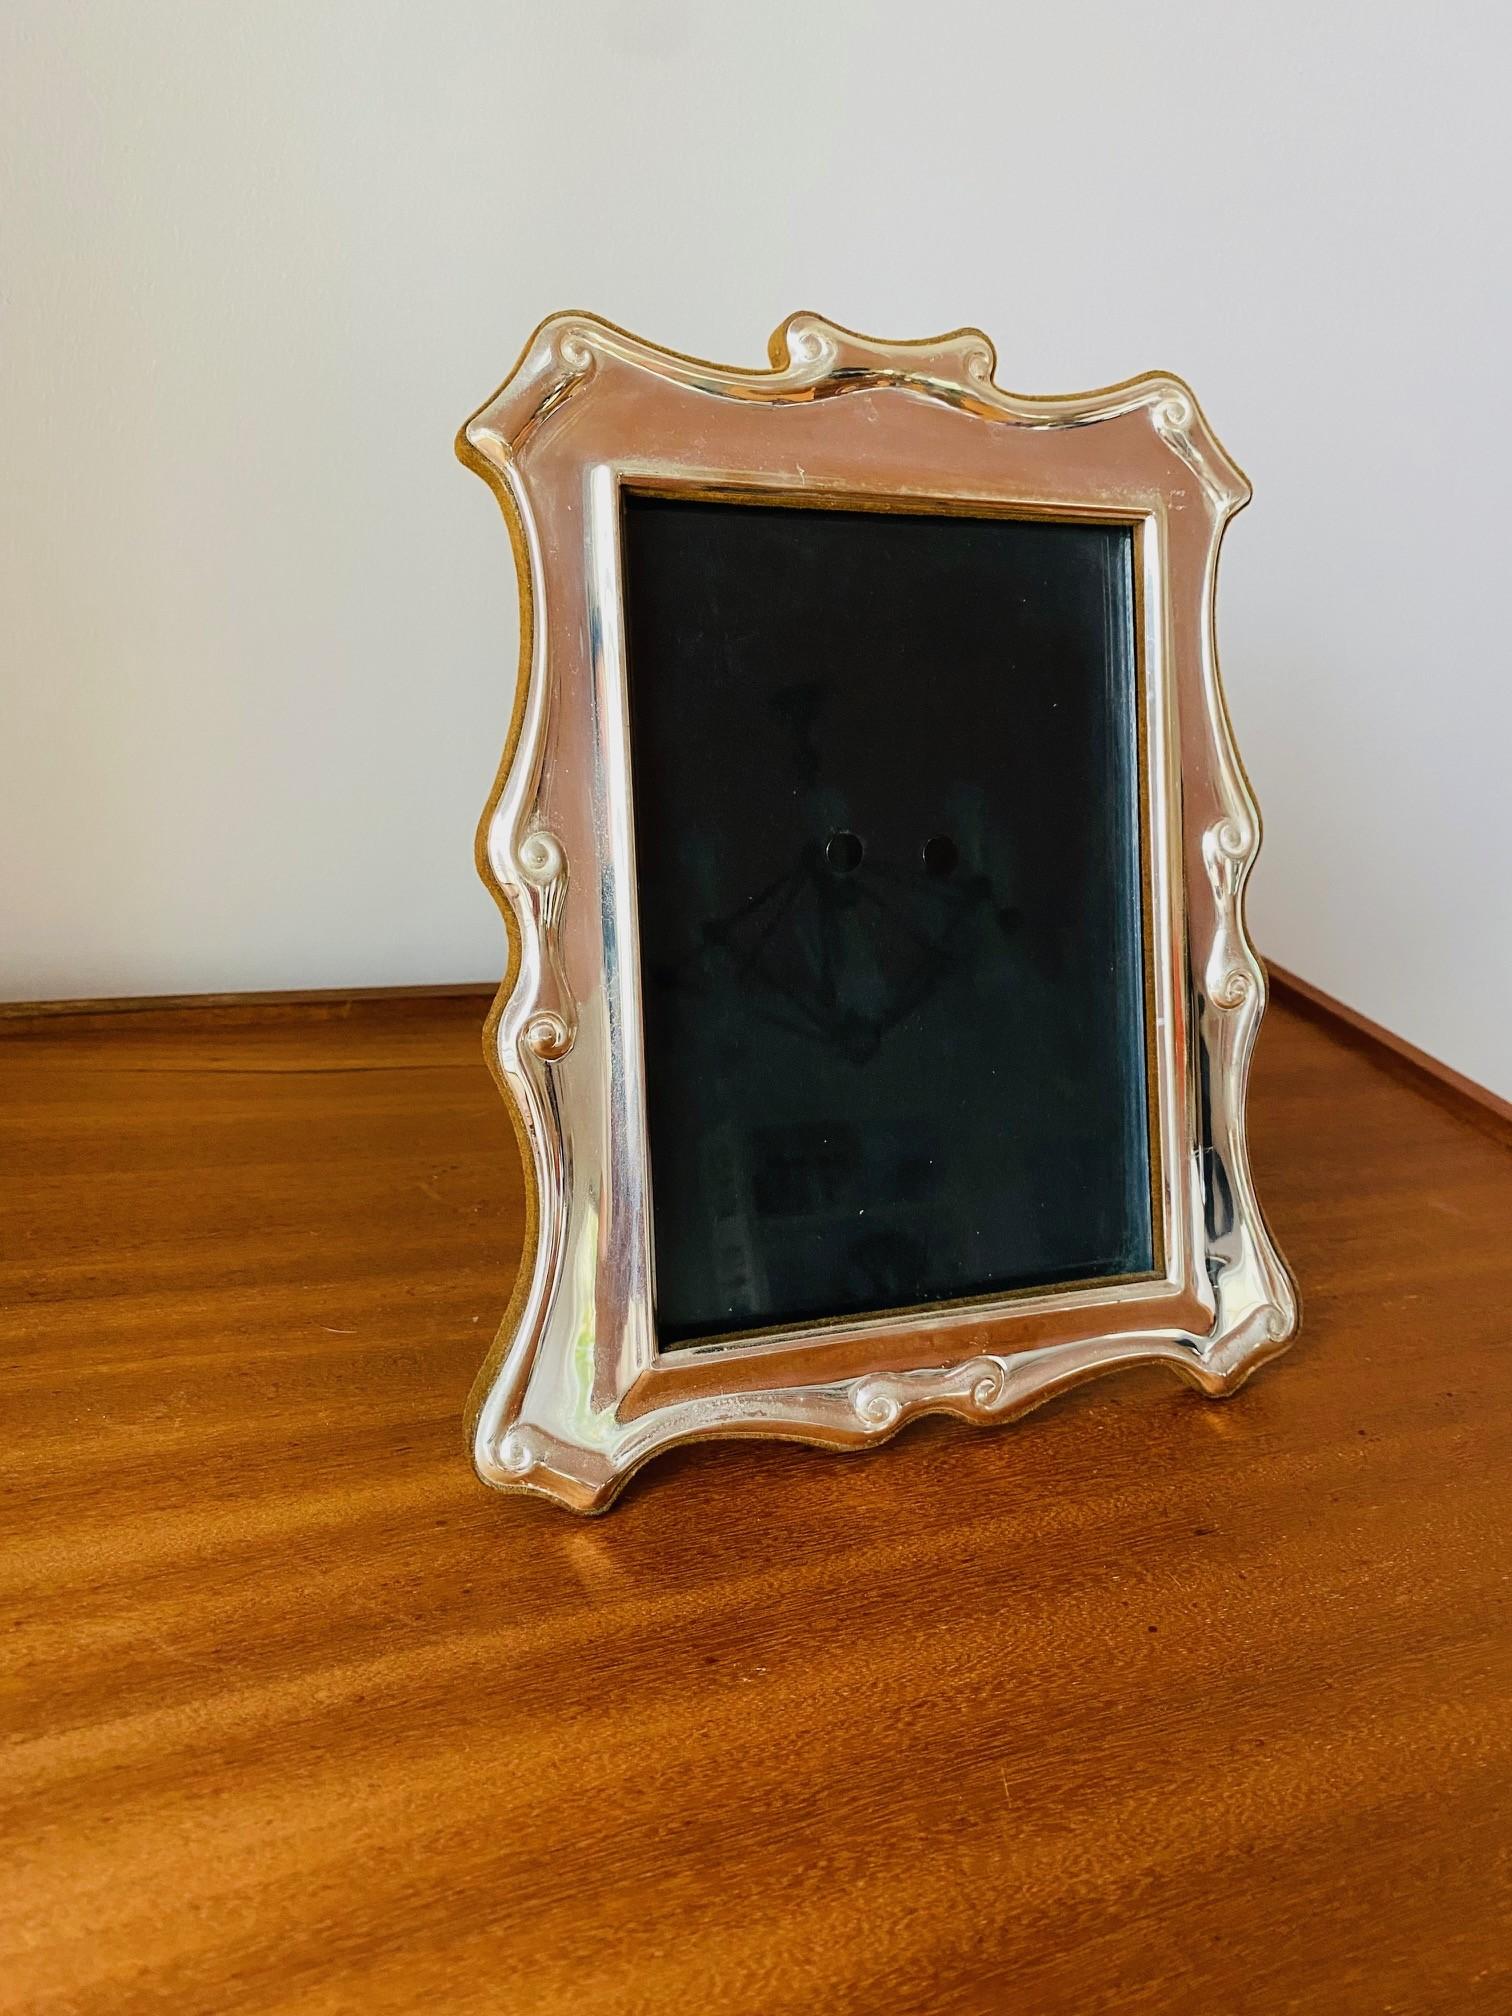 Stylish and architectural silver plated vintage photo frame.  A legacy in design, Carrs of Sheffield proposes whimsical design for home decor.  This beautiful piece exudes silver metal glow as it is completely enveloped in a beautiful green suede